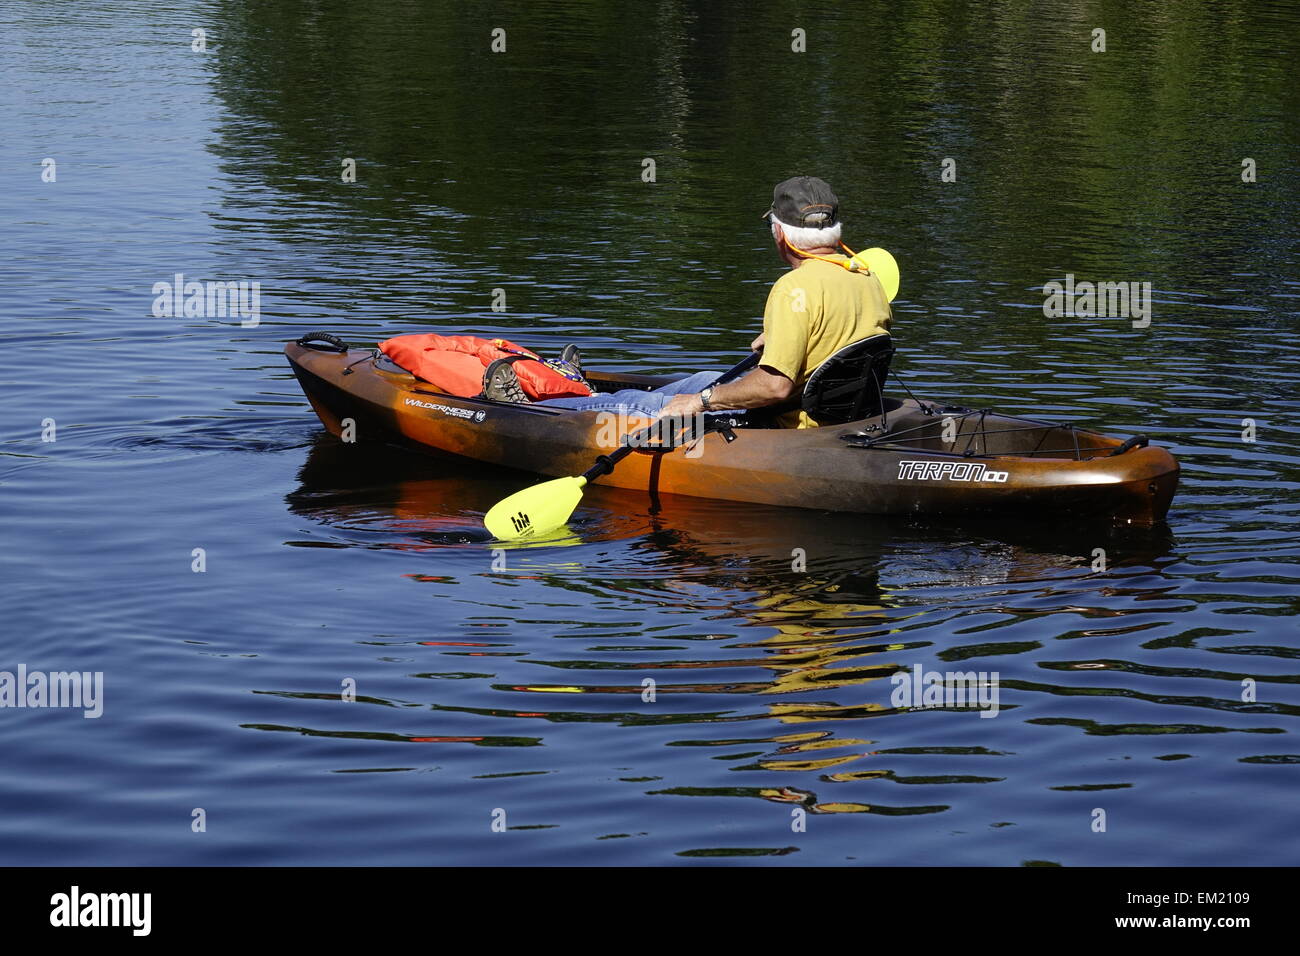 Man paddling Florida river in boat with open cockpit Stock Photo